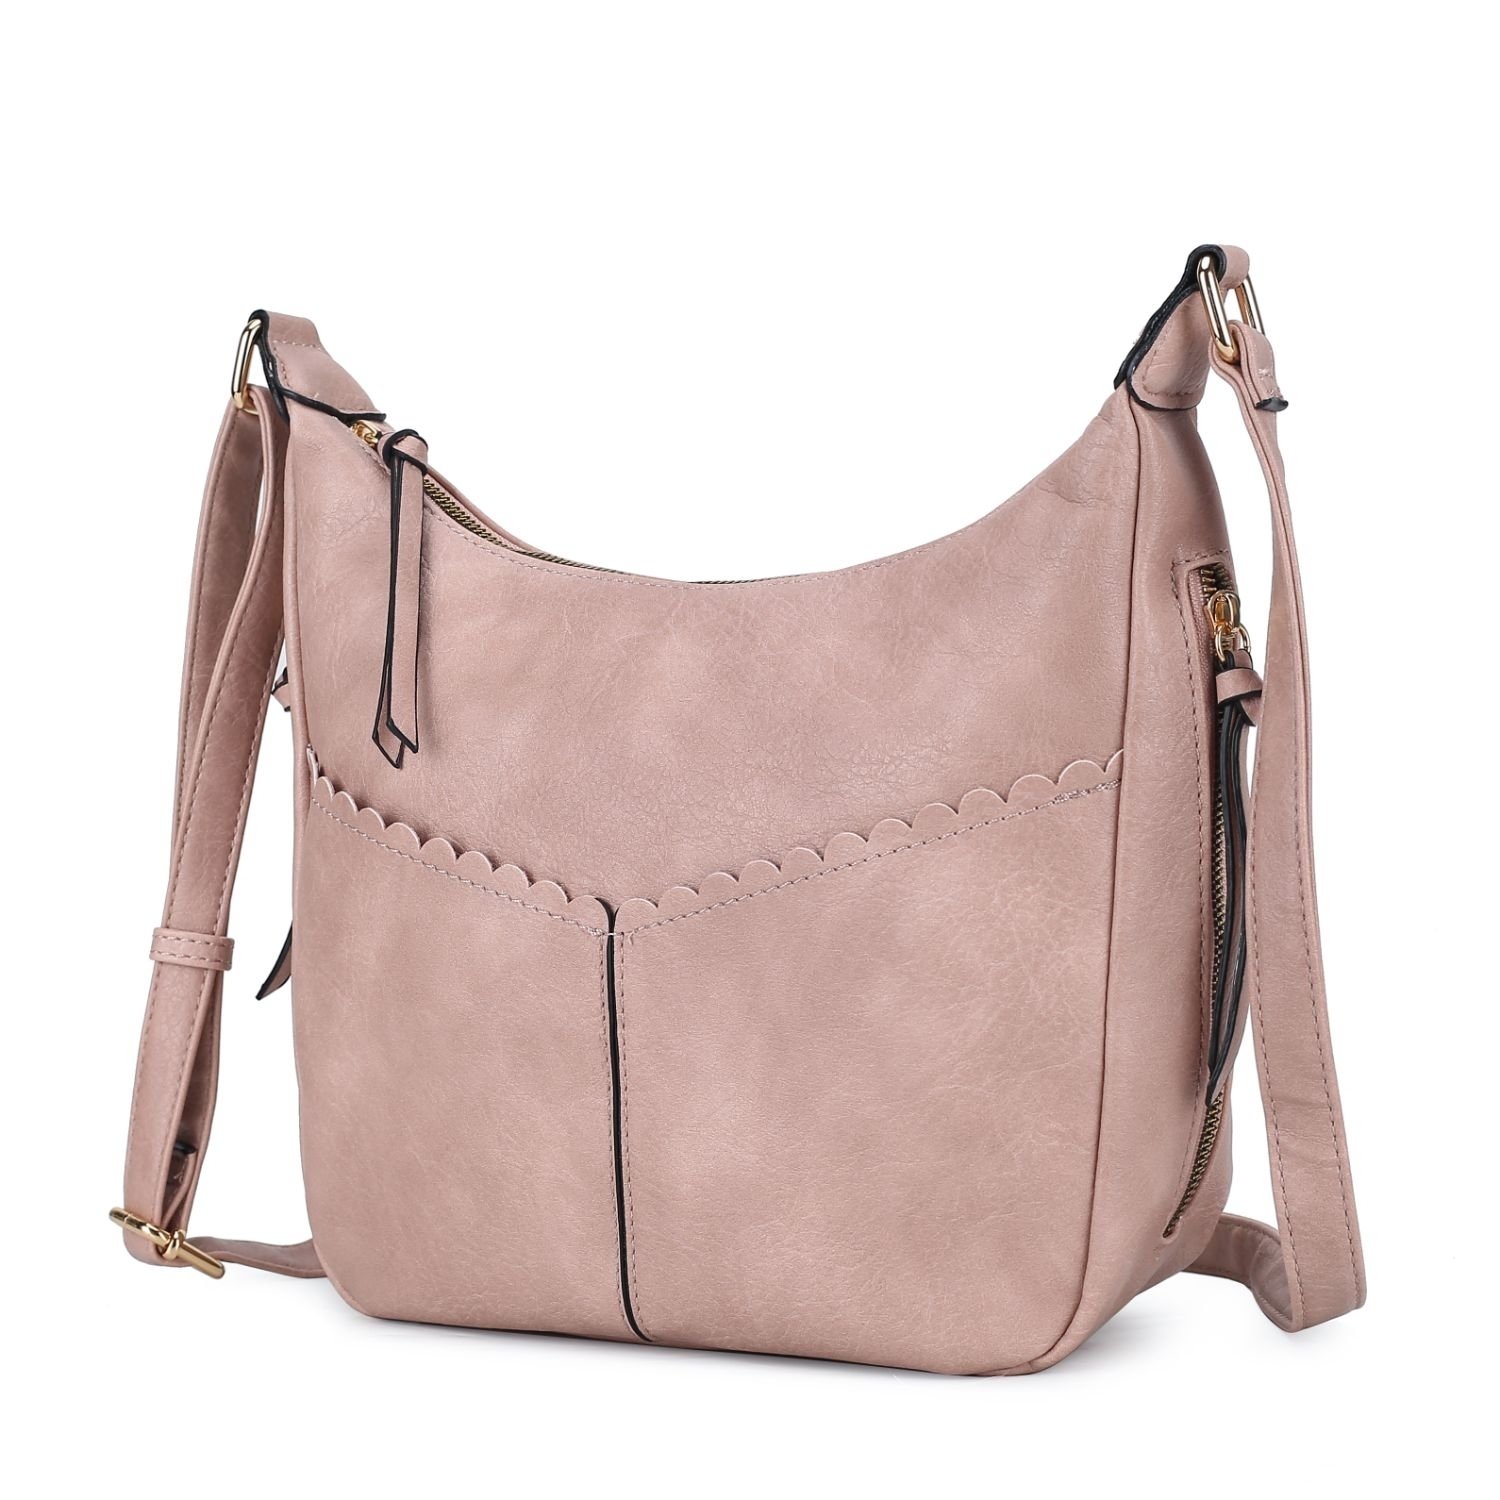 MKF Collection Valencia Vegan Leather Women's Shoulder Bag By Mia K - Pink